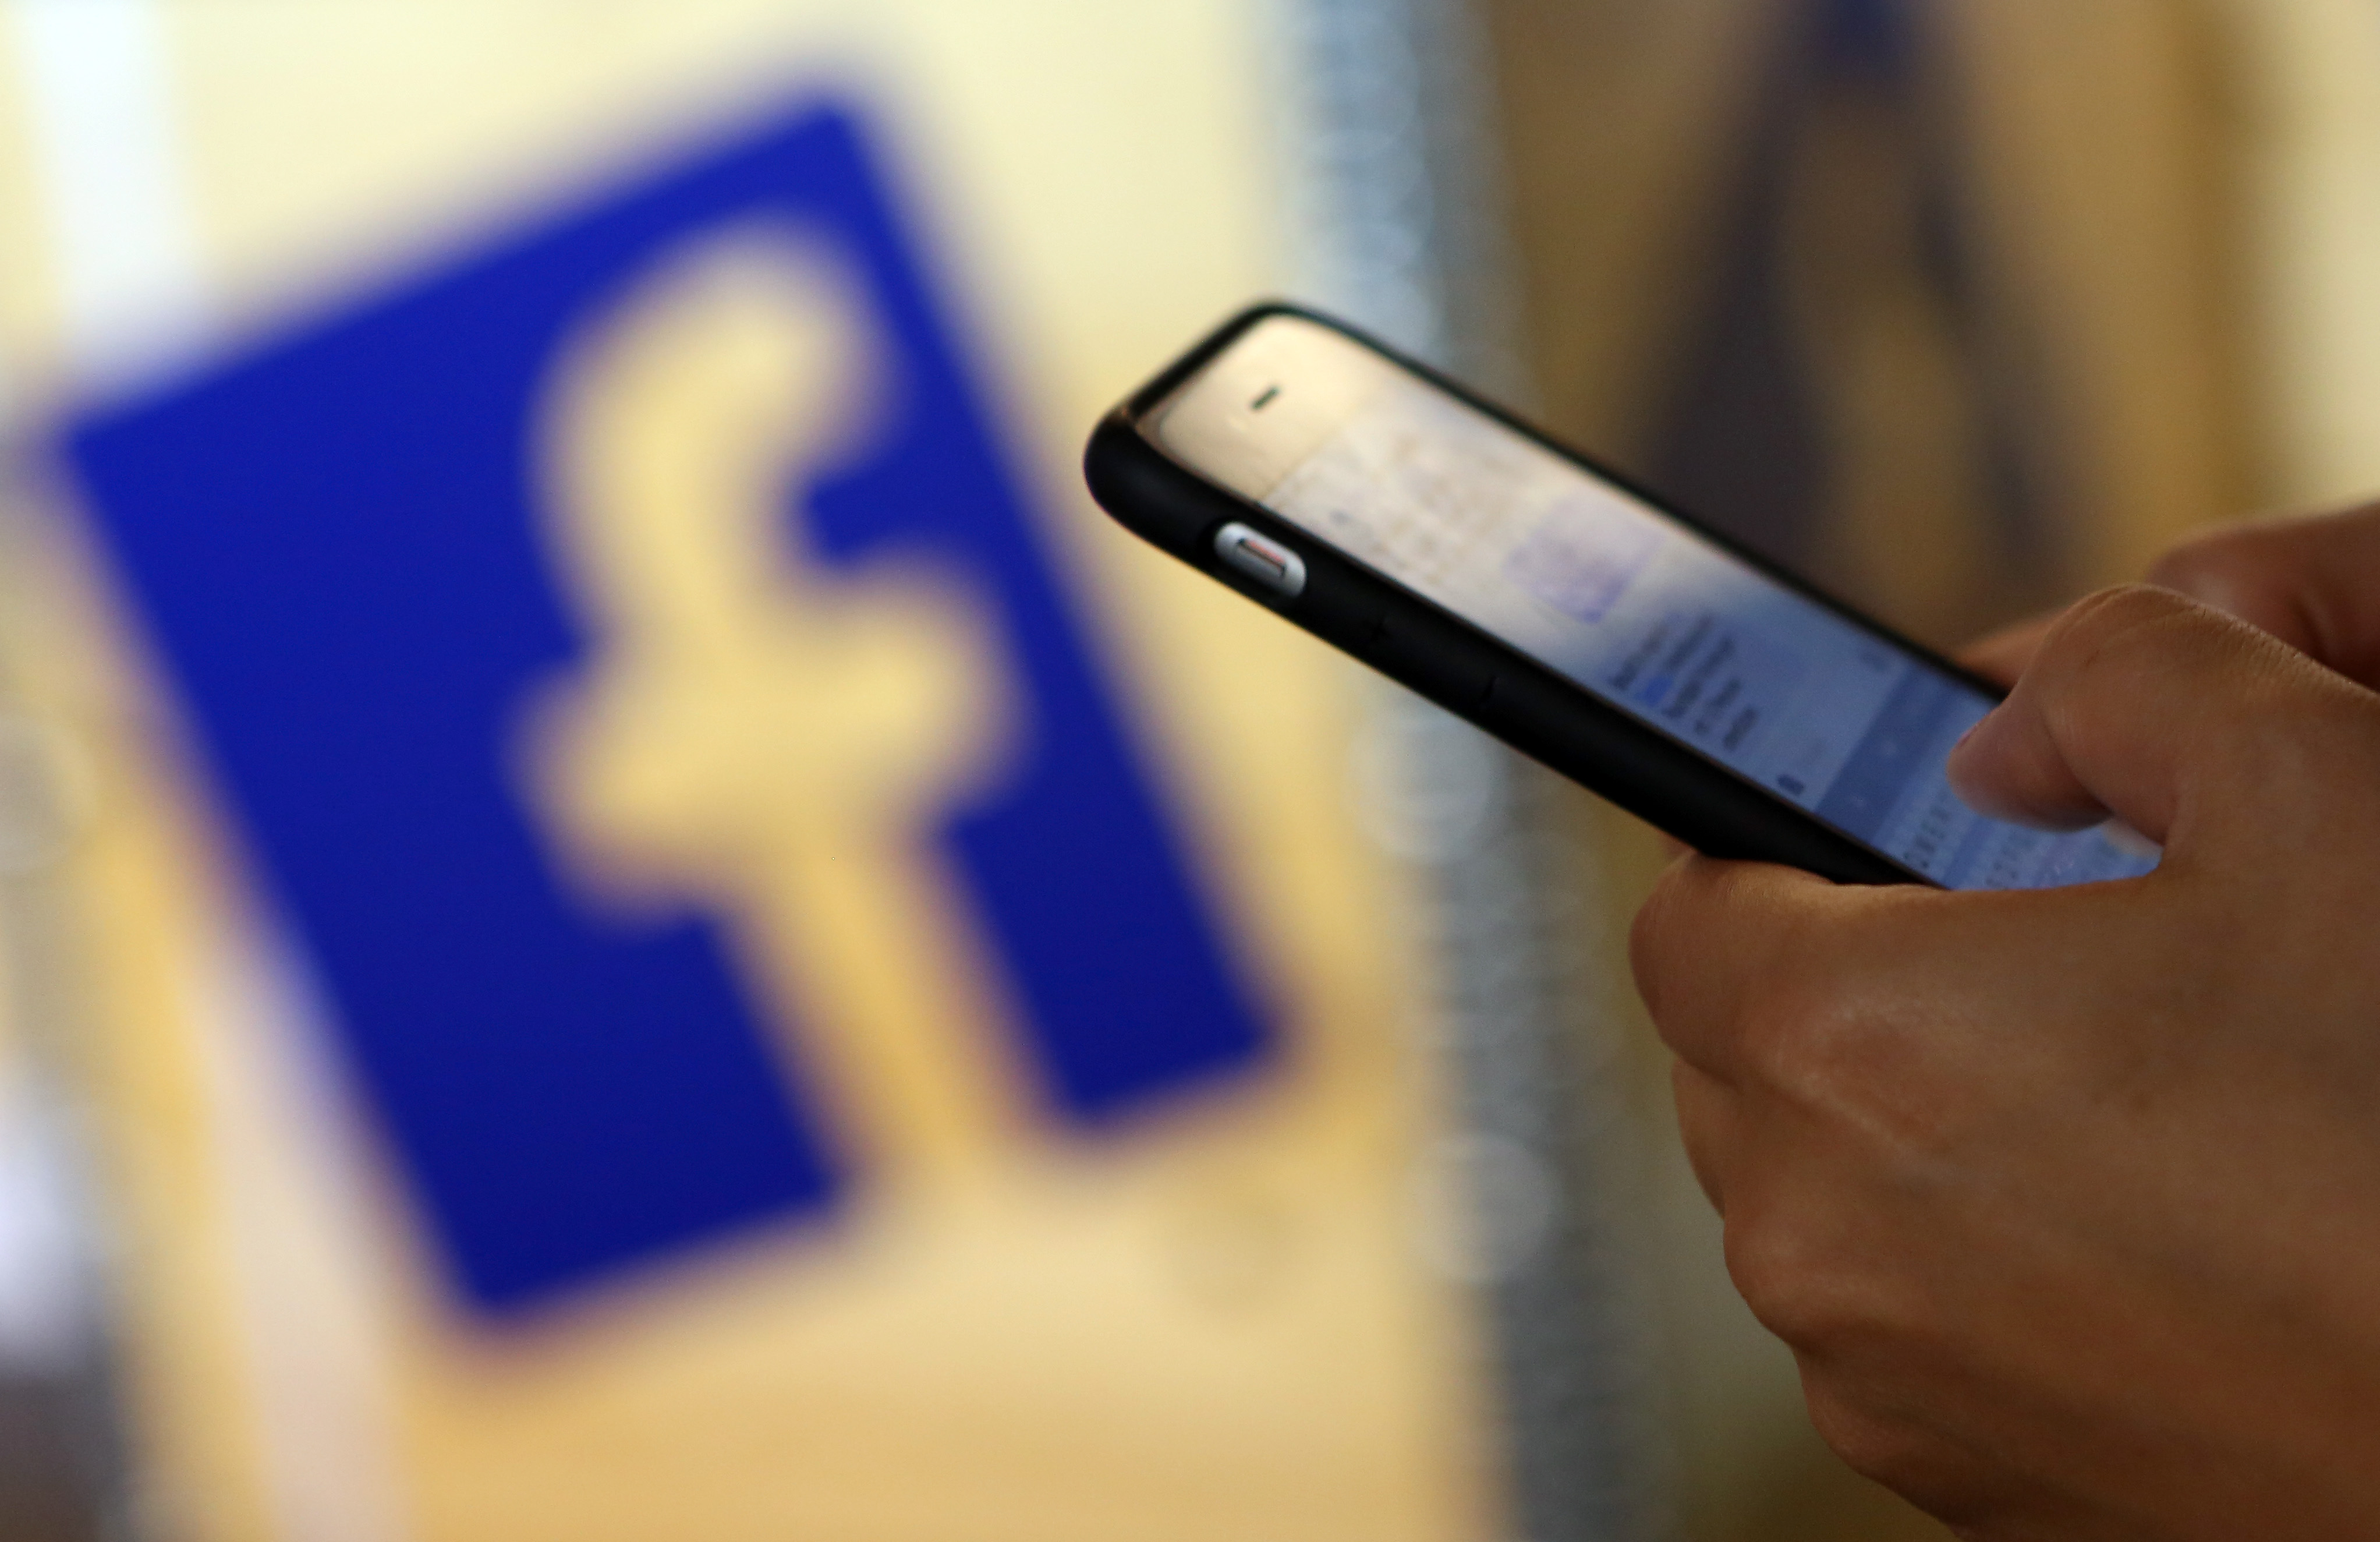 A huge database of Facebook users' phone numbers found online